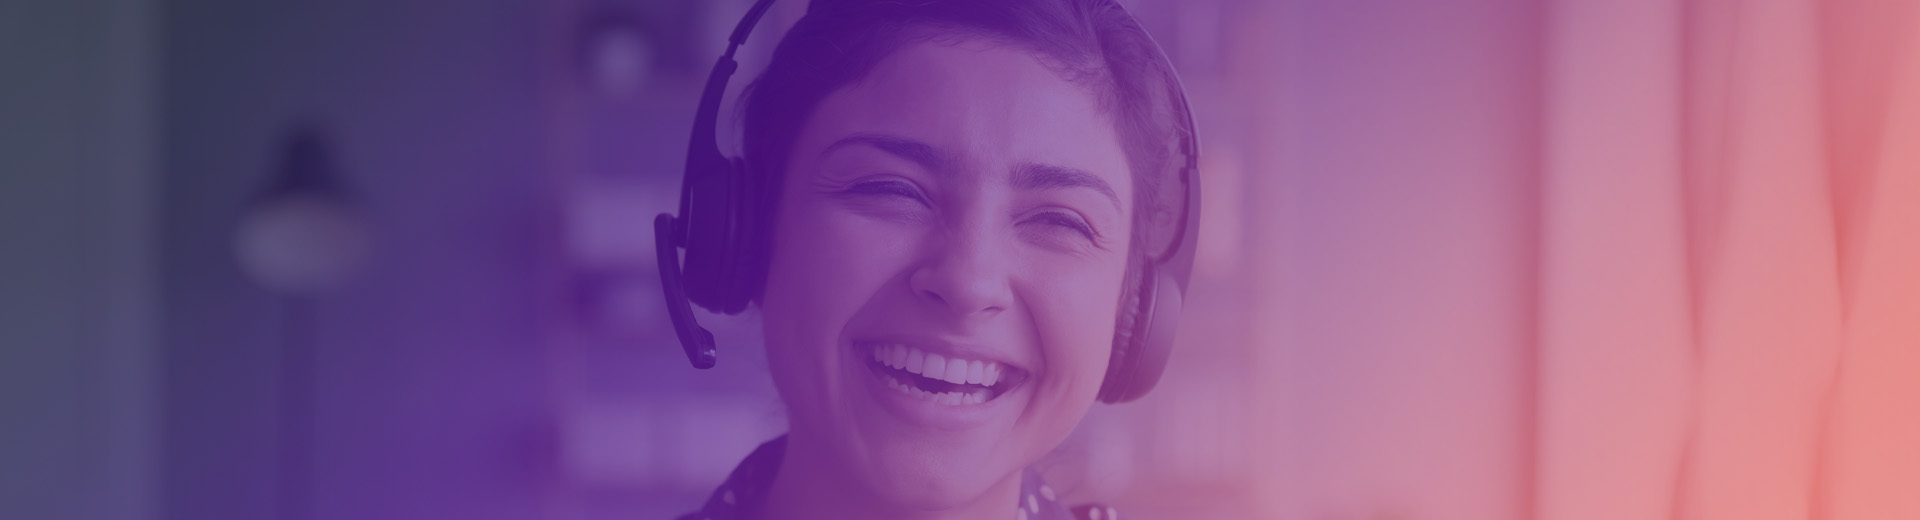 Lady laughing with headset on